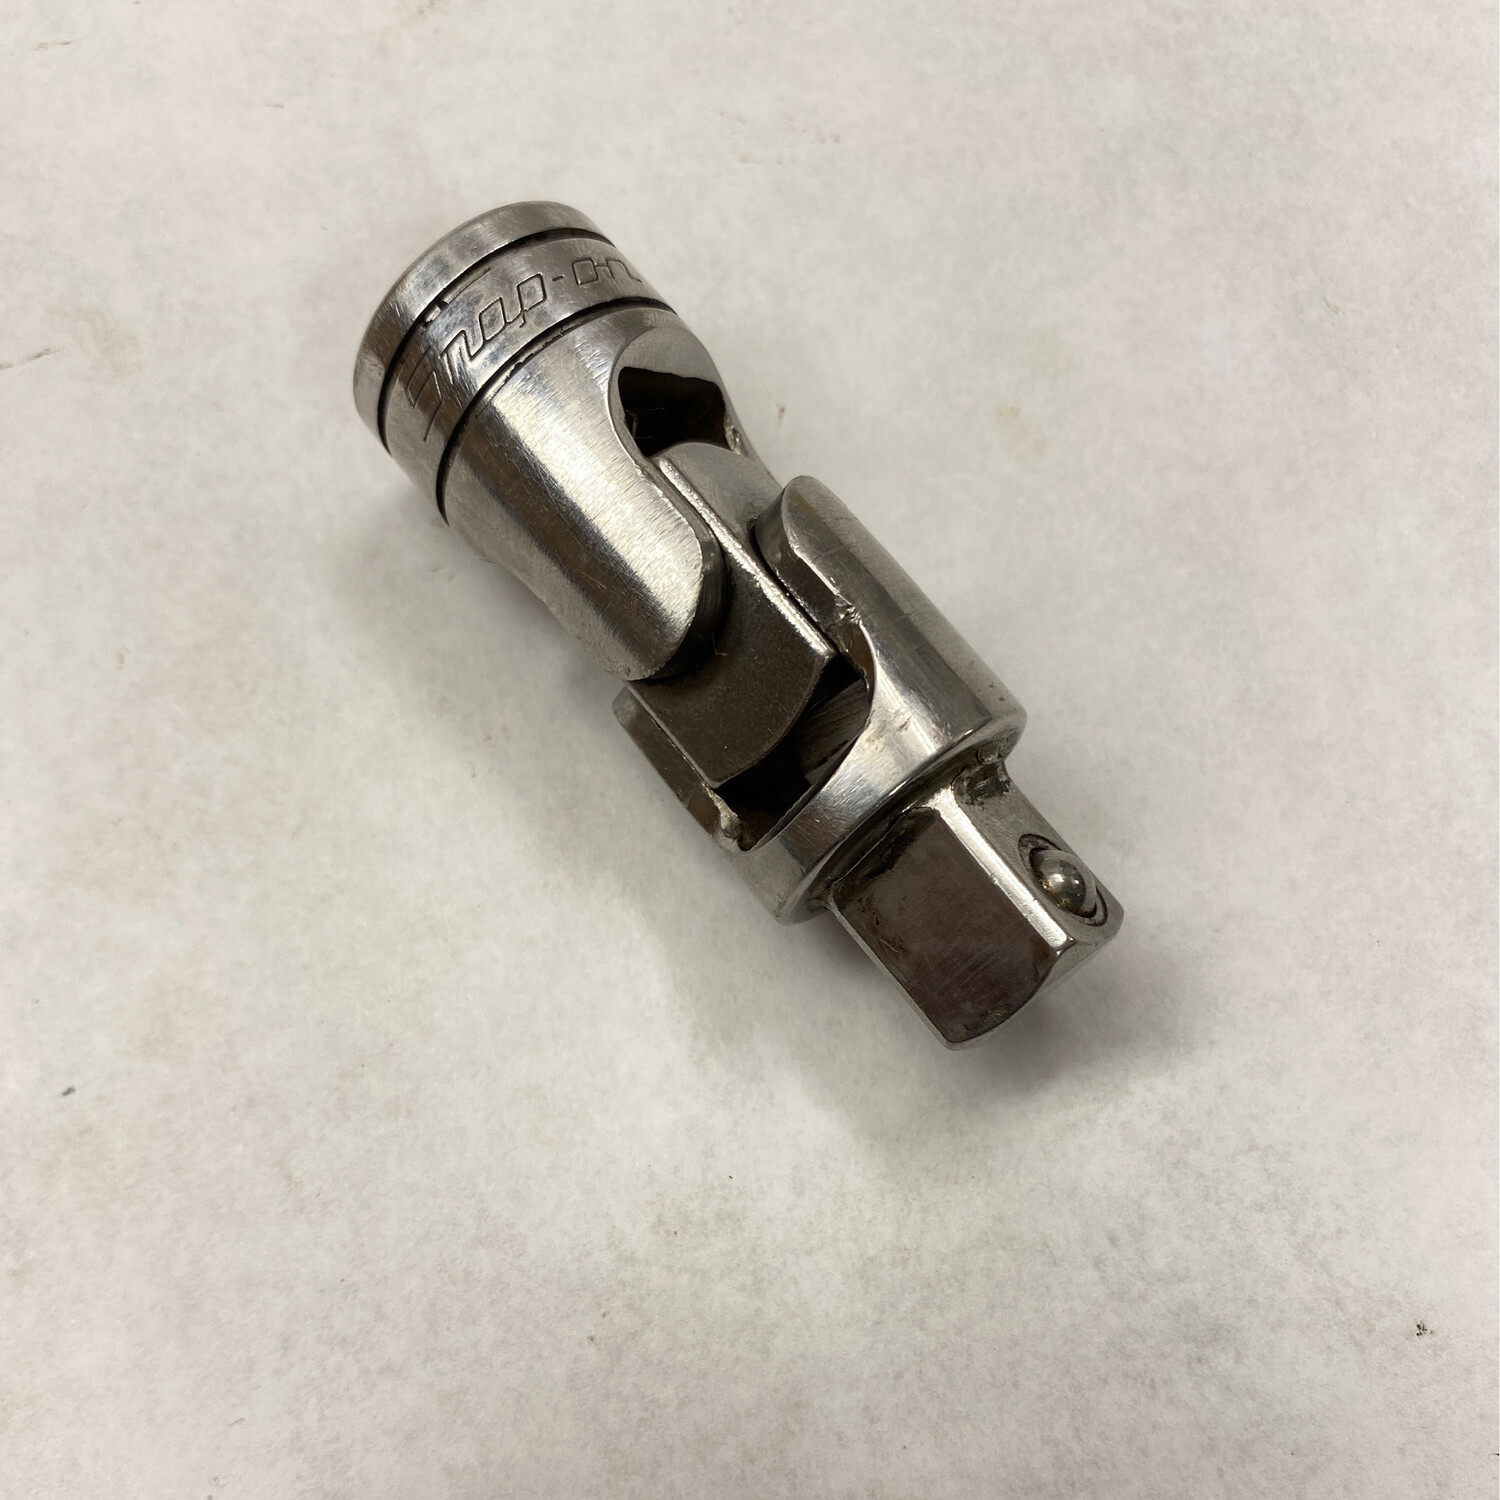 Snap On 1/2” Drive Universal Joint Adapter